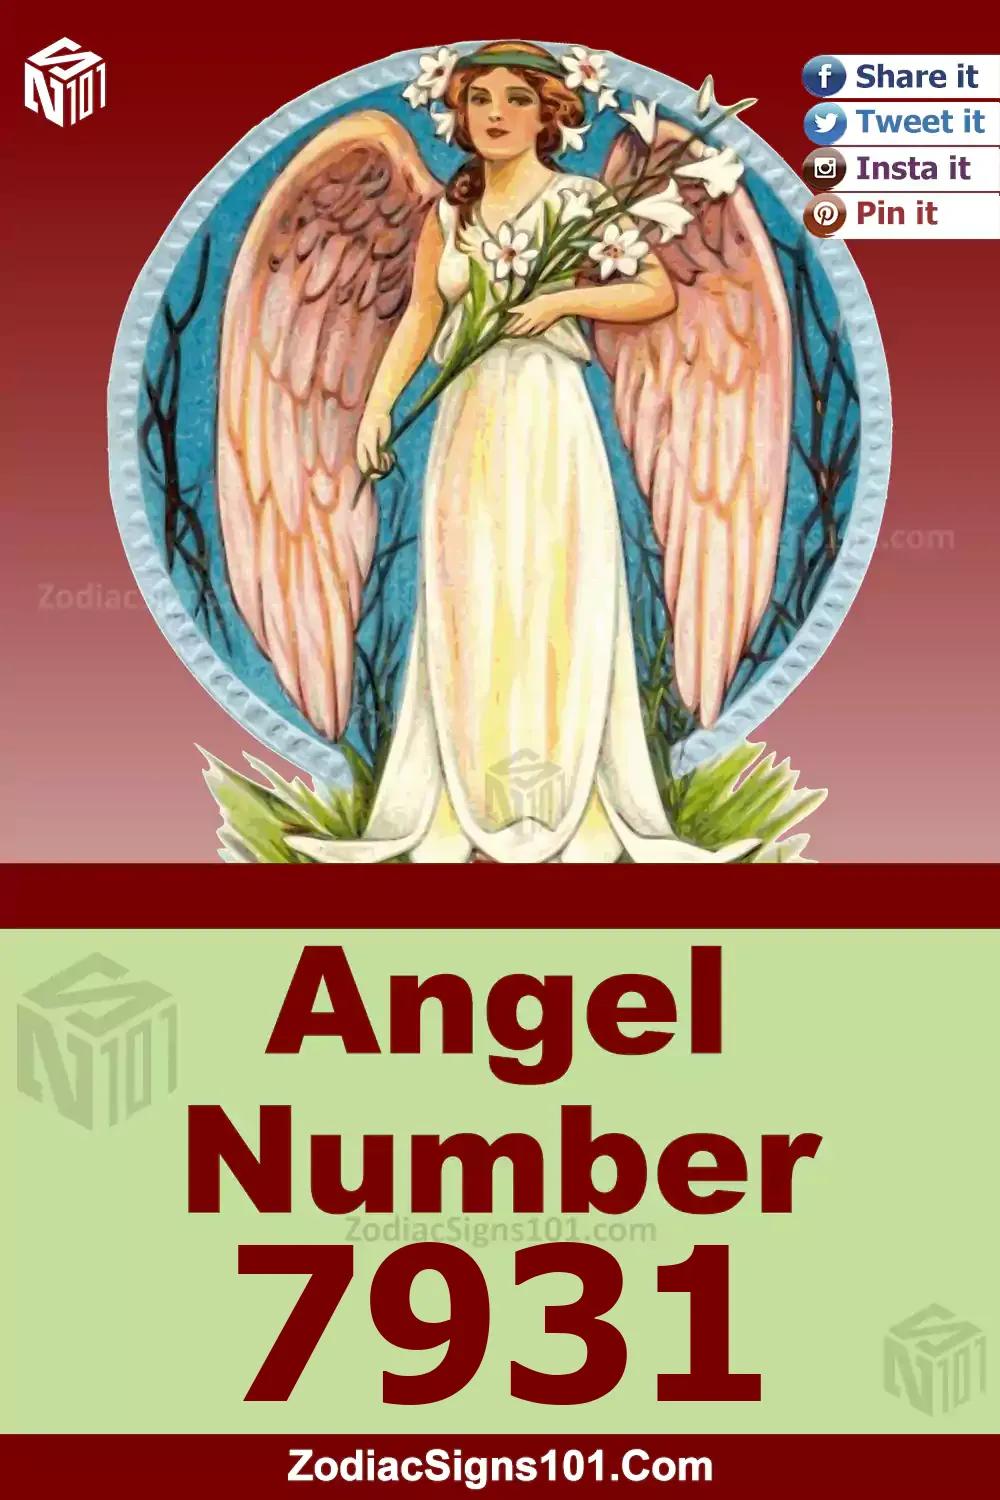 7931 Angel Number Meaning